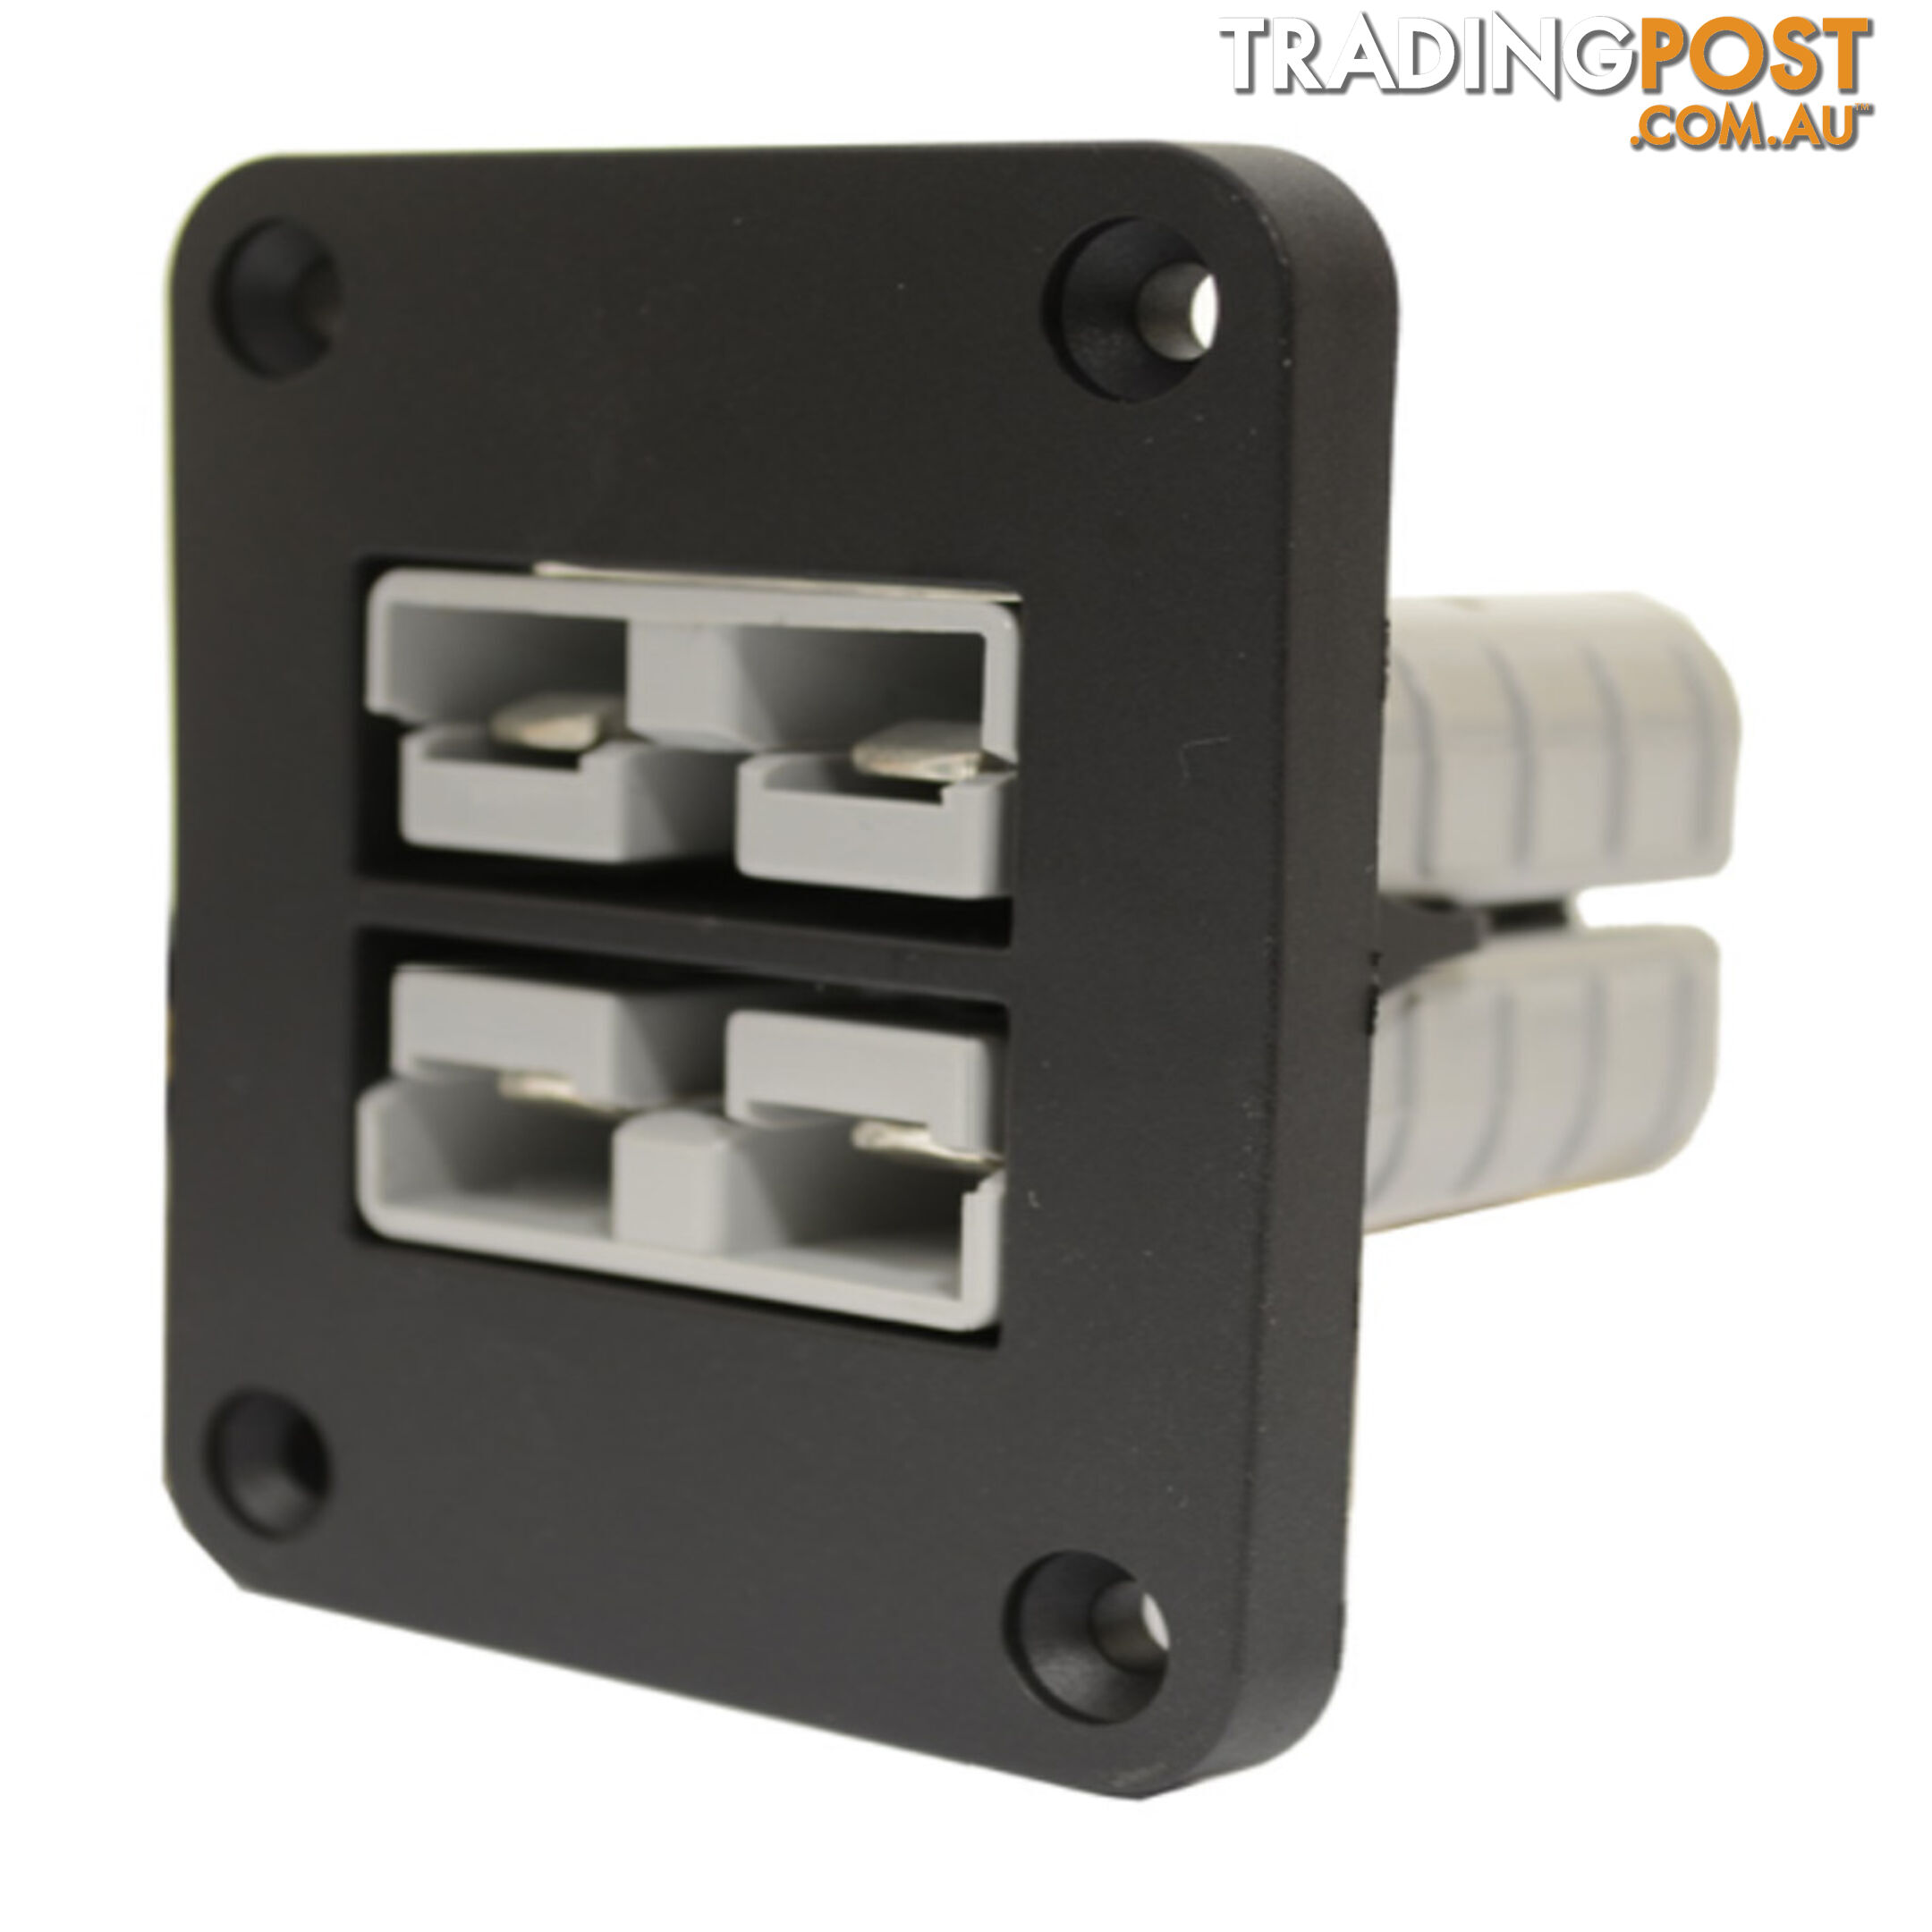 LV Dual 50a Anderson Connector Panel Mount with Plugs SKU - LV2457